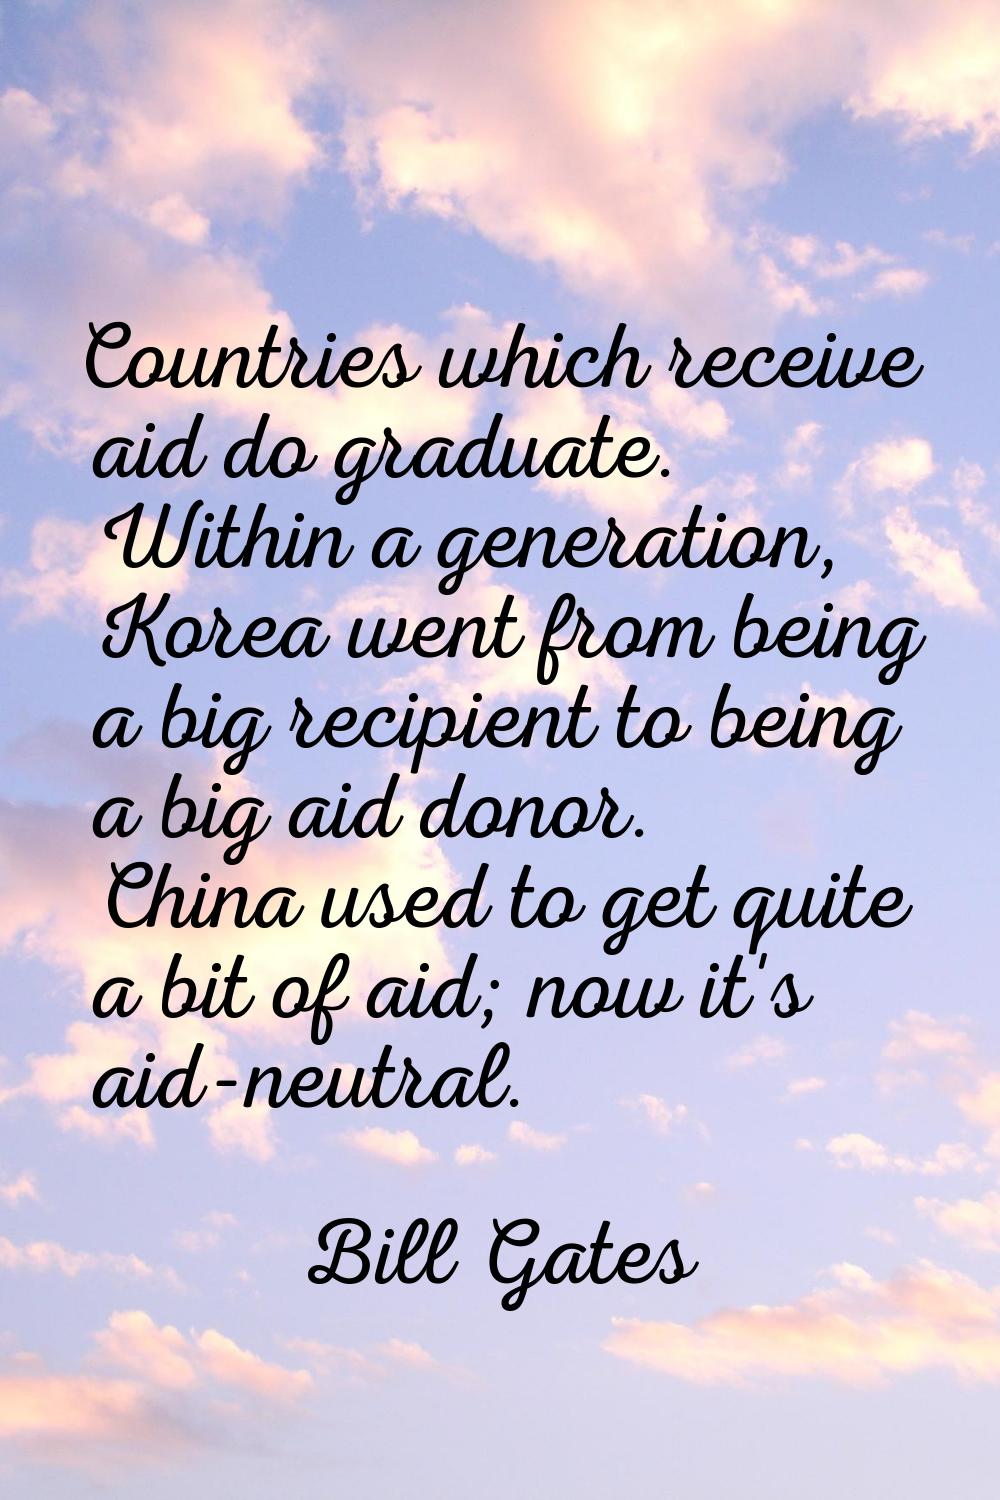 Countries which receive aid do graduate. Within a generation, Korea went from being a big recipient